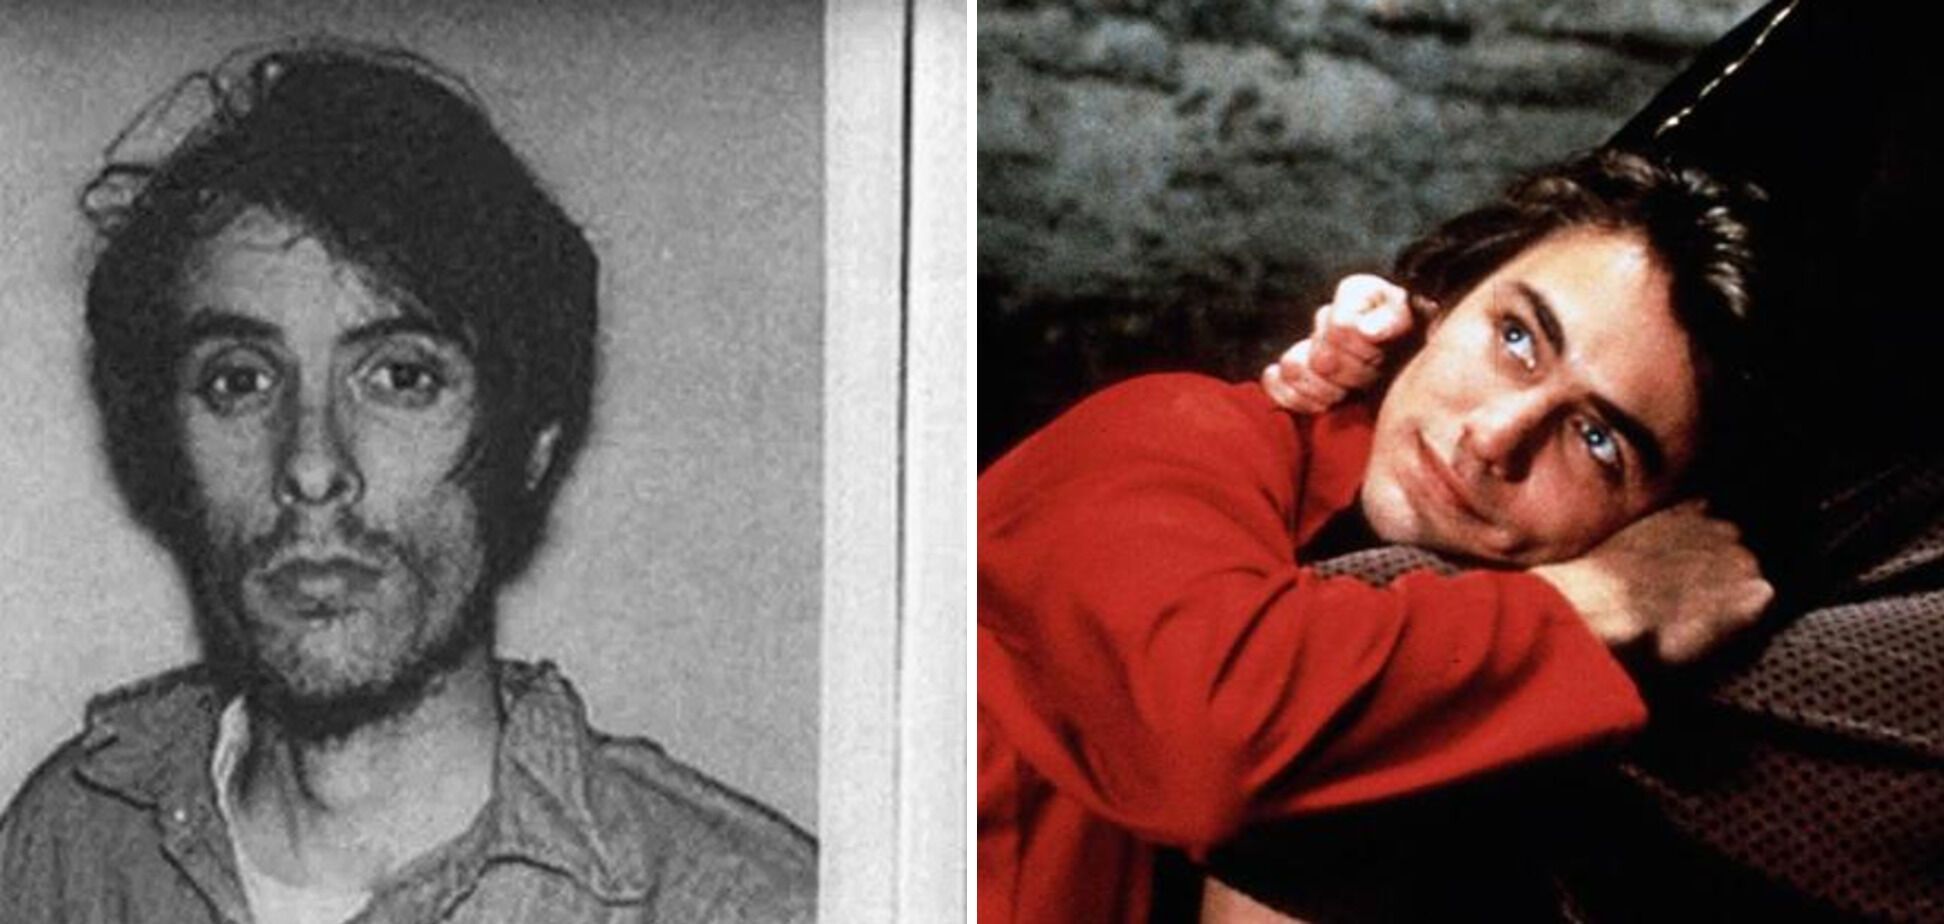 Jack the Ripper, Chikatilo, and others: what famous serial killers looked like in movies and in real life. Photo.